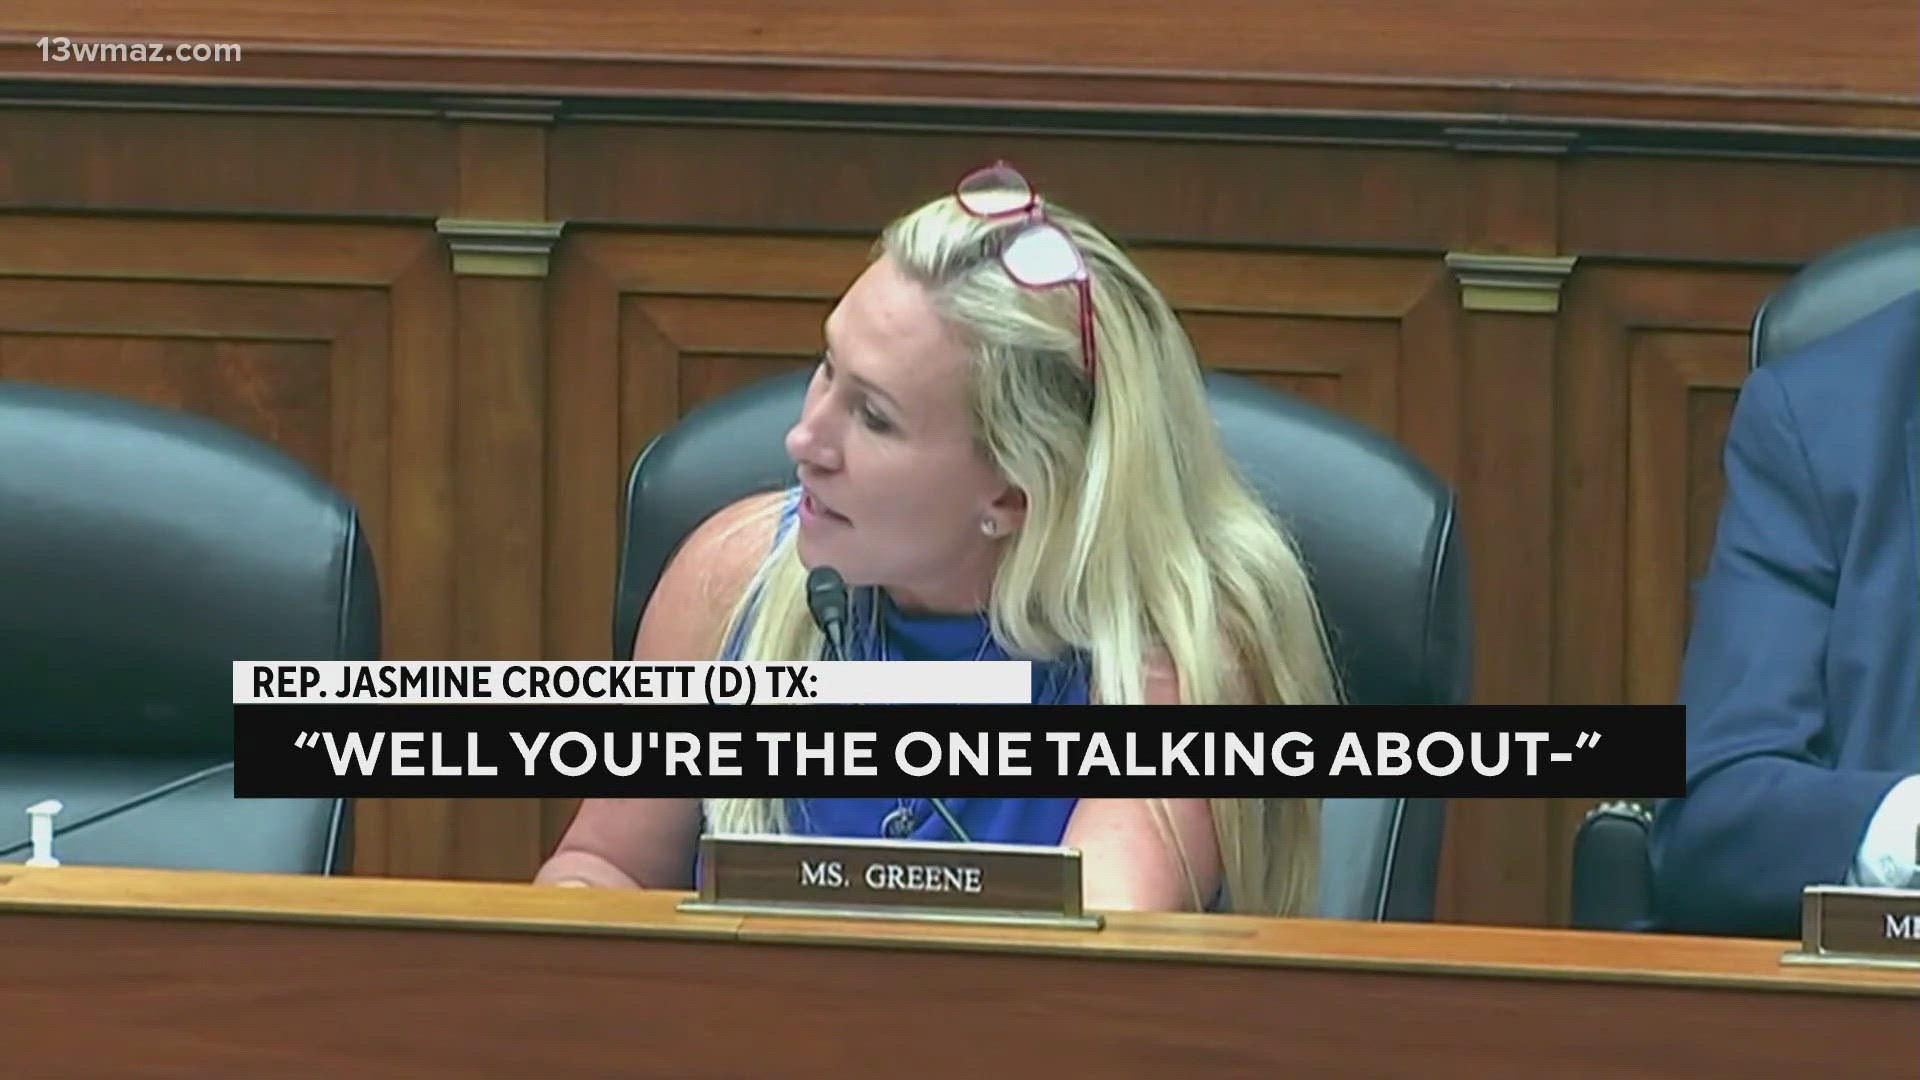 The Oversight and Accountability Committee hearing took a nasty turn after Republican Marjorie Taylor Greene made a personal jab at Democrat Jasmine Crockett.